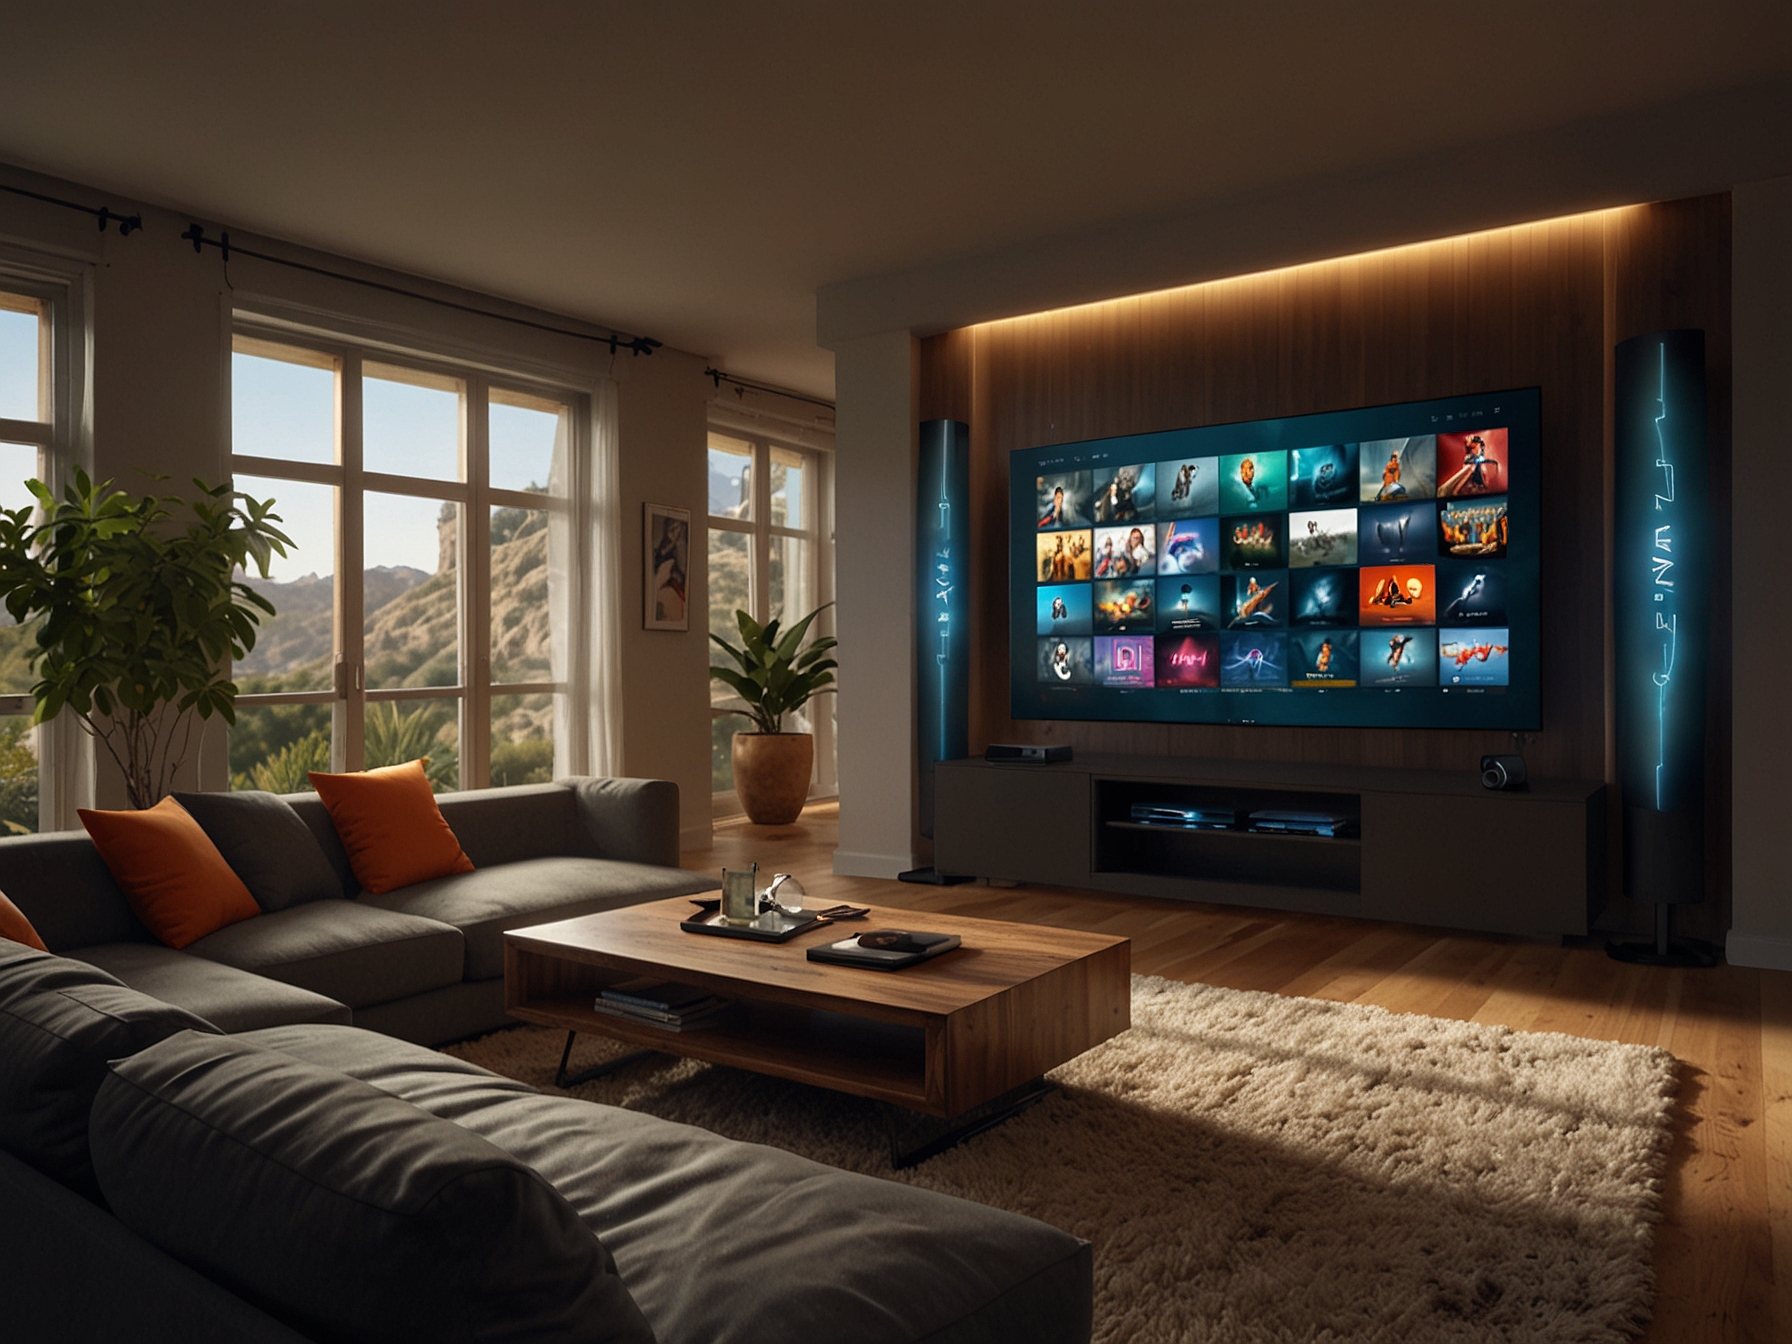 An illustration of evolving digital home entertainment technology, including streaming platforms and 4K Ultra HD, representing the innovative strategies Alvarez is expected to implement at Paramount Pictures.